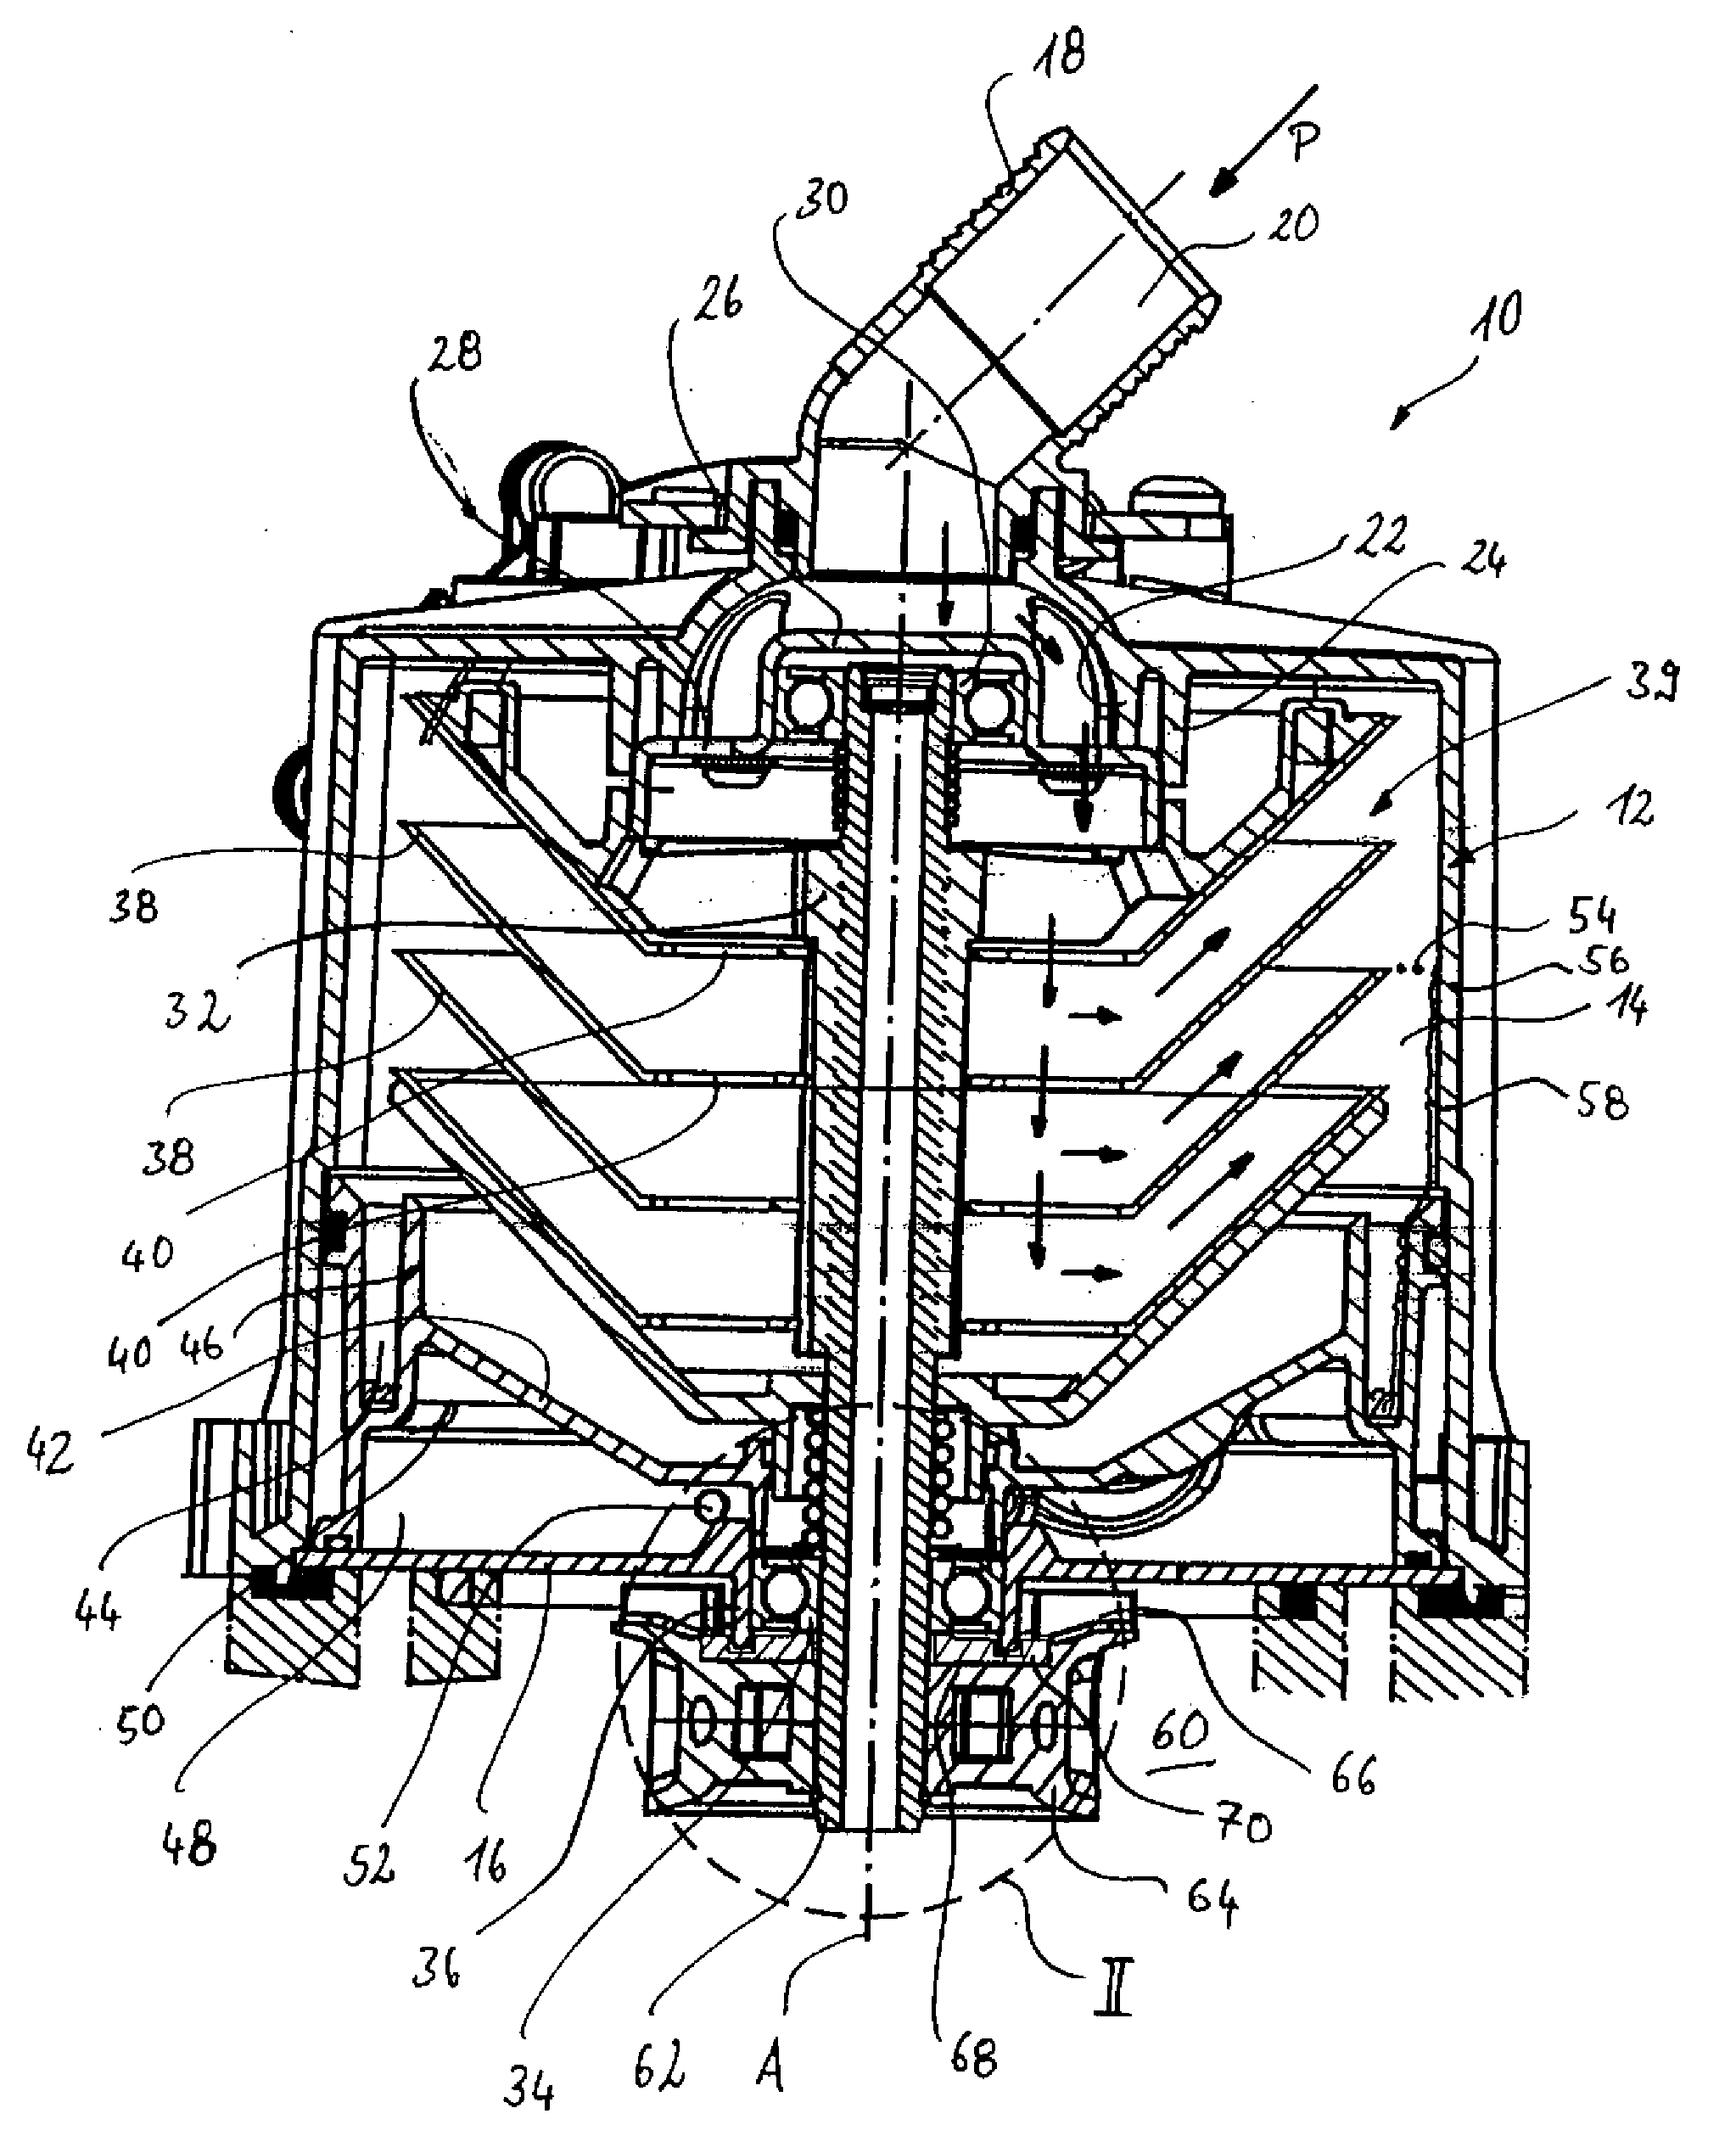 Apparatus for the Purification of Gas While Bleeding a Crank Housing